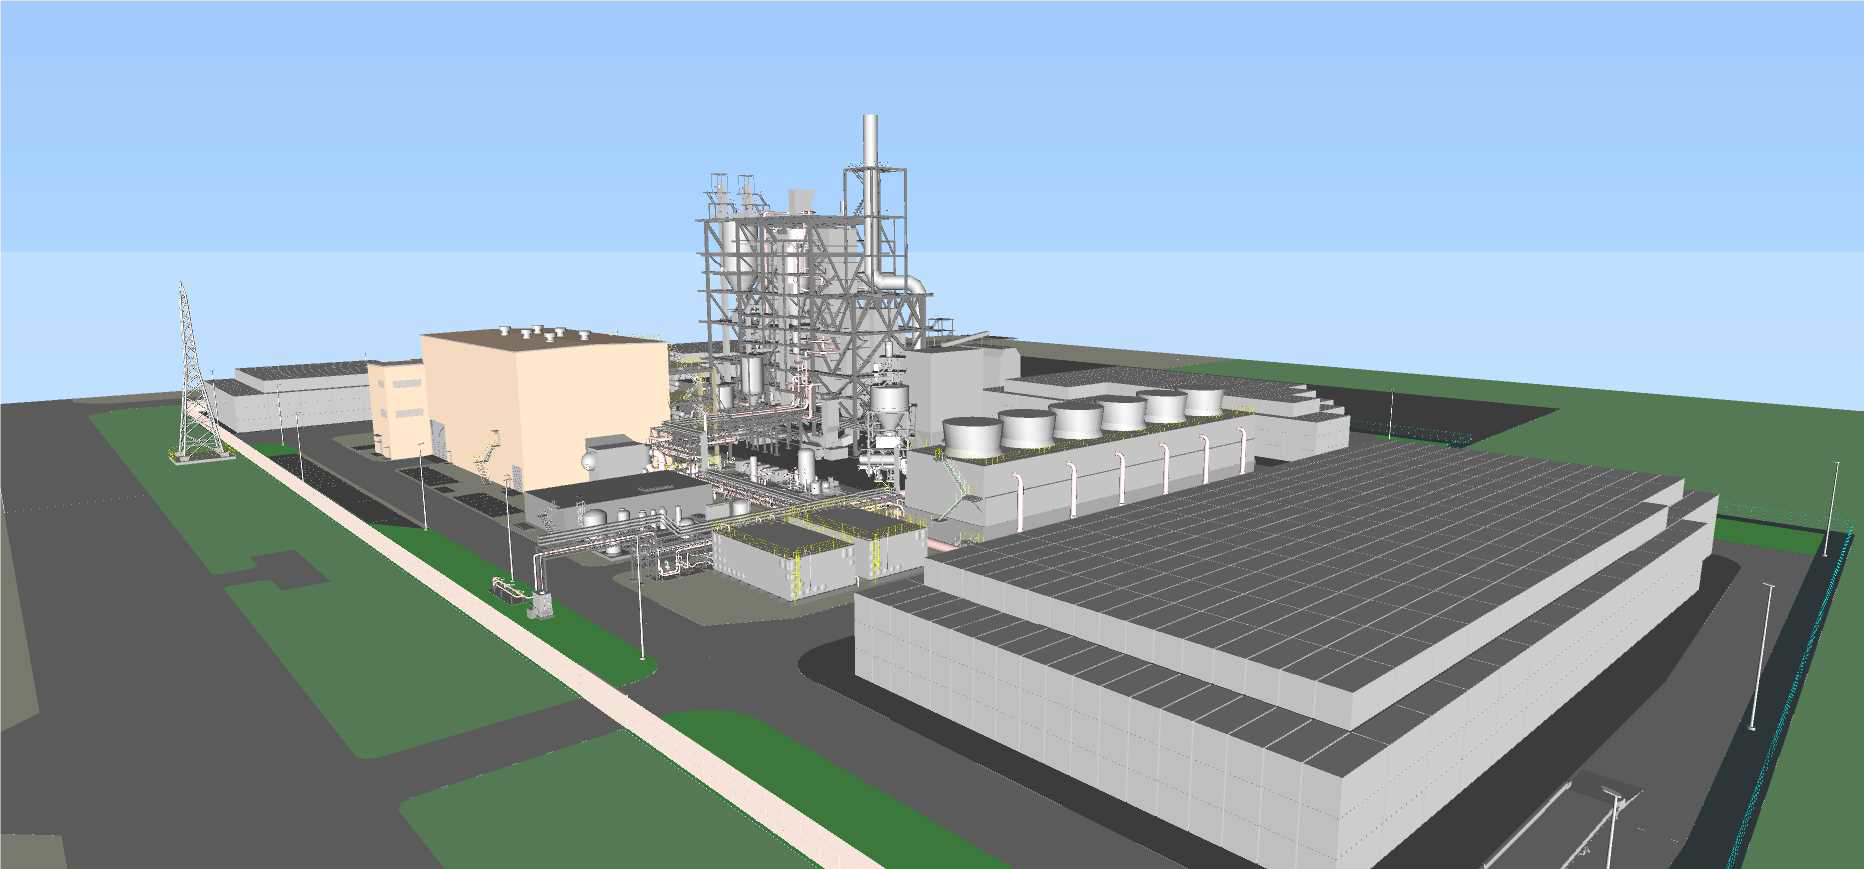 【Illustration of the Completed Biomass Plant】